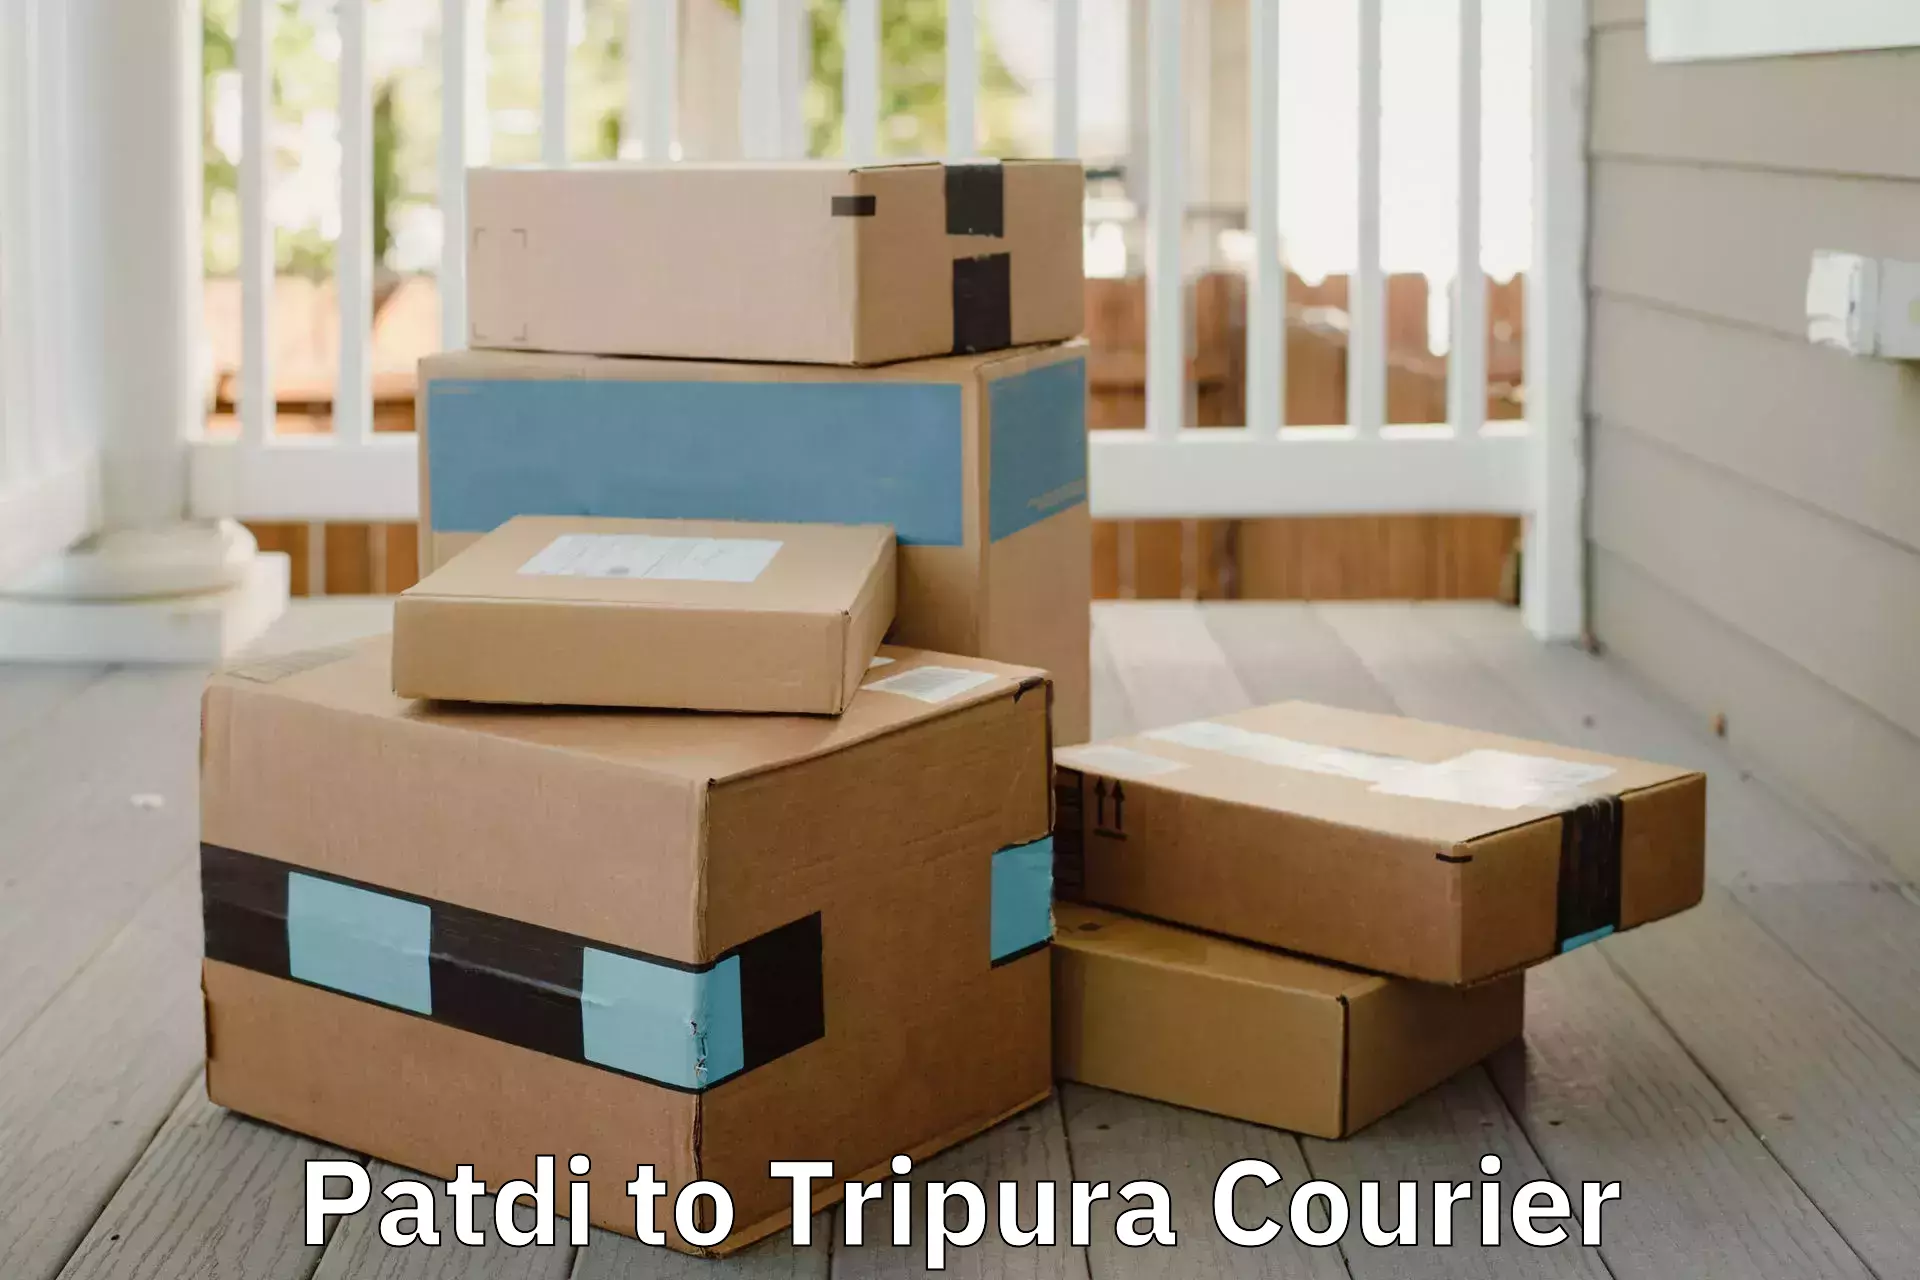 Trusted relocation experts Patdi to Tripura